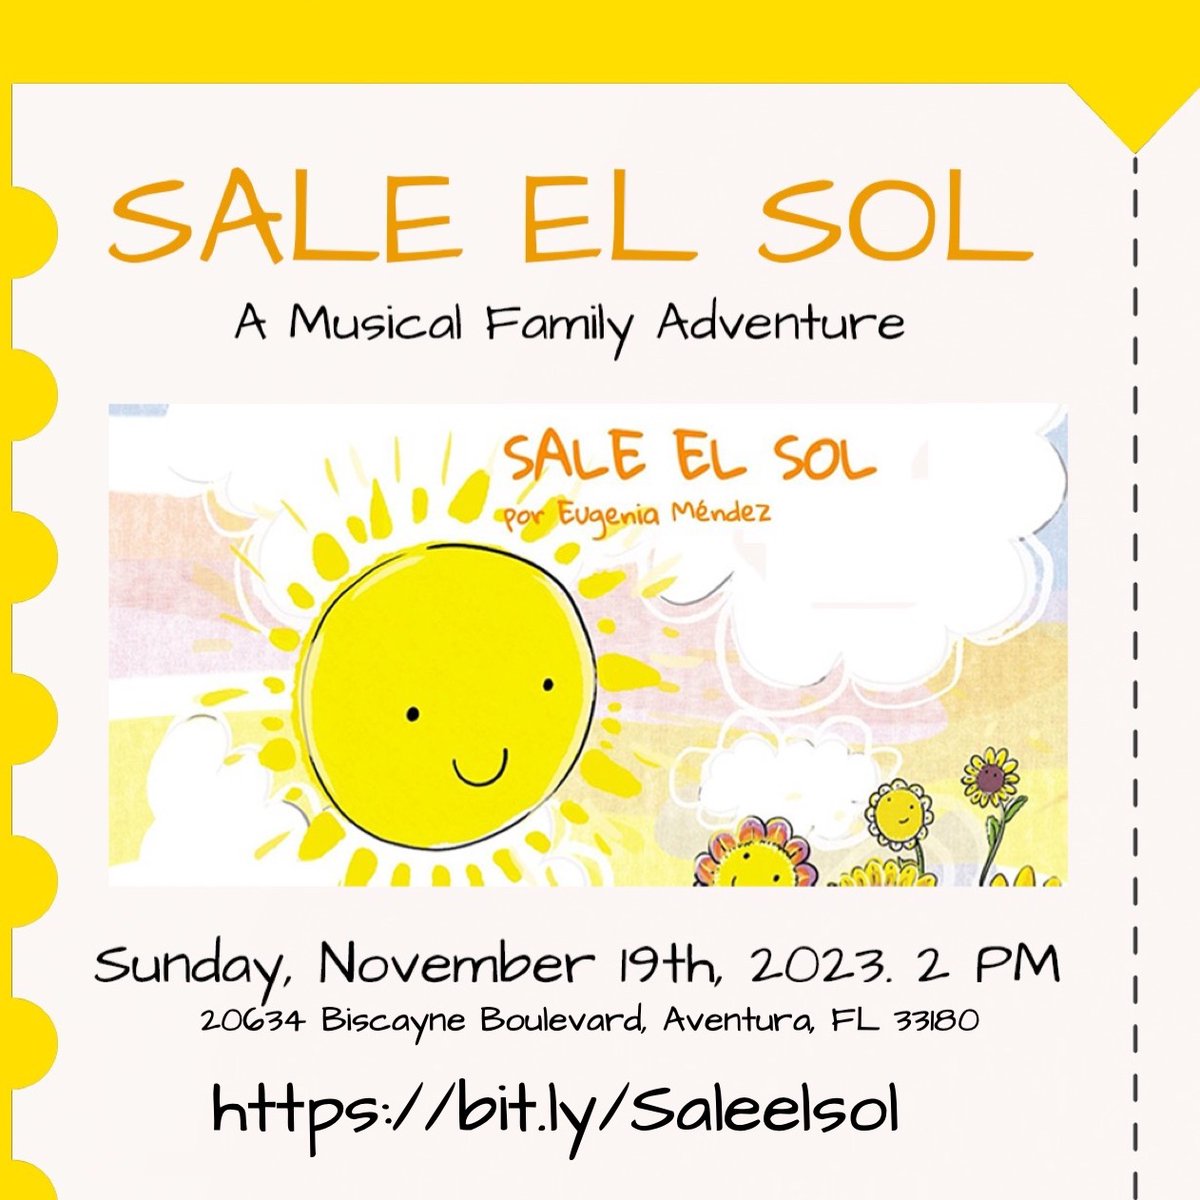 bit.ly/Saleelsol Eugenia Méndez composer, author is playing the piano & narrating, Karrie Griffiths is at the #flute, and #GuillermoLefeld, creator of the original sounds effects in Sale el Sol recording, in the percussion and sound effects #musicalstorytelling #saleelsol